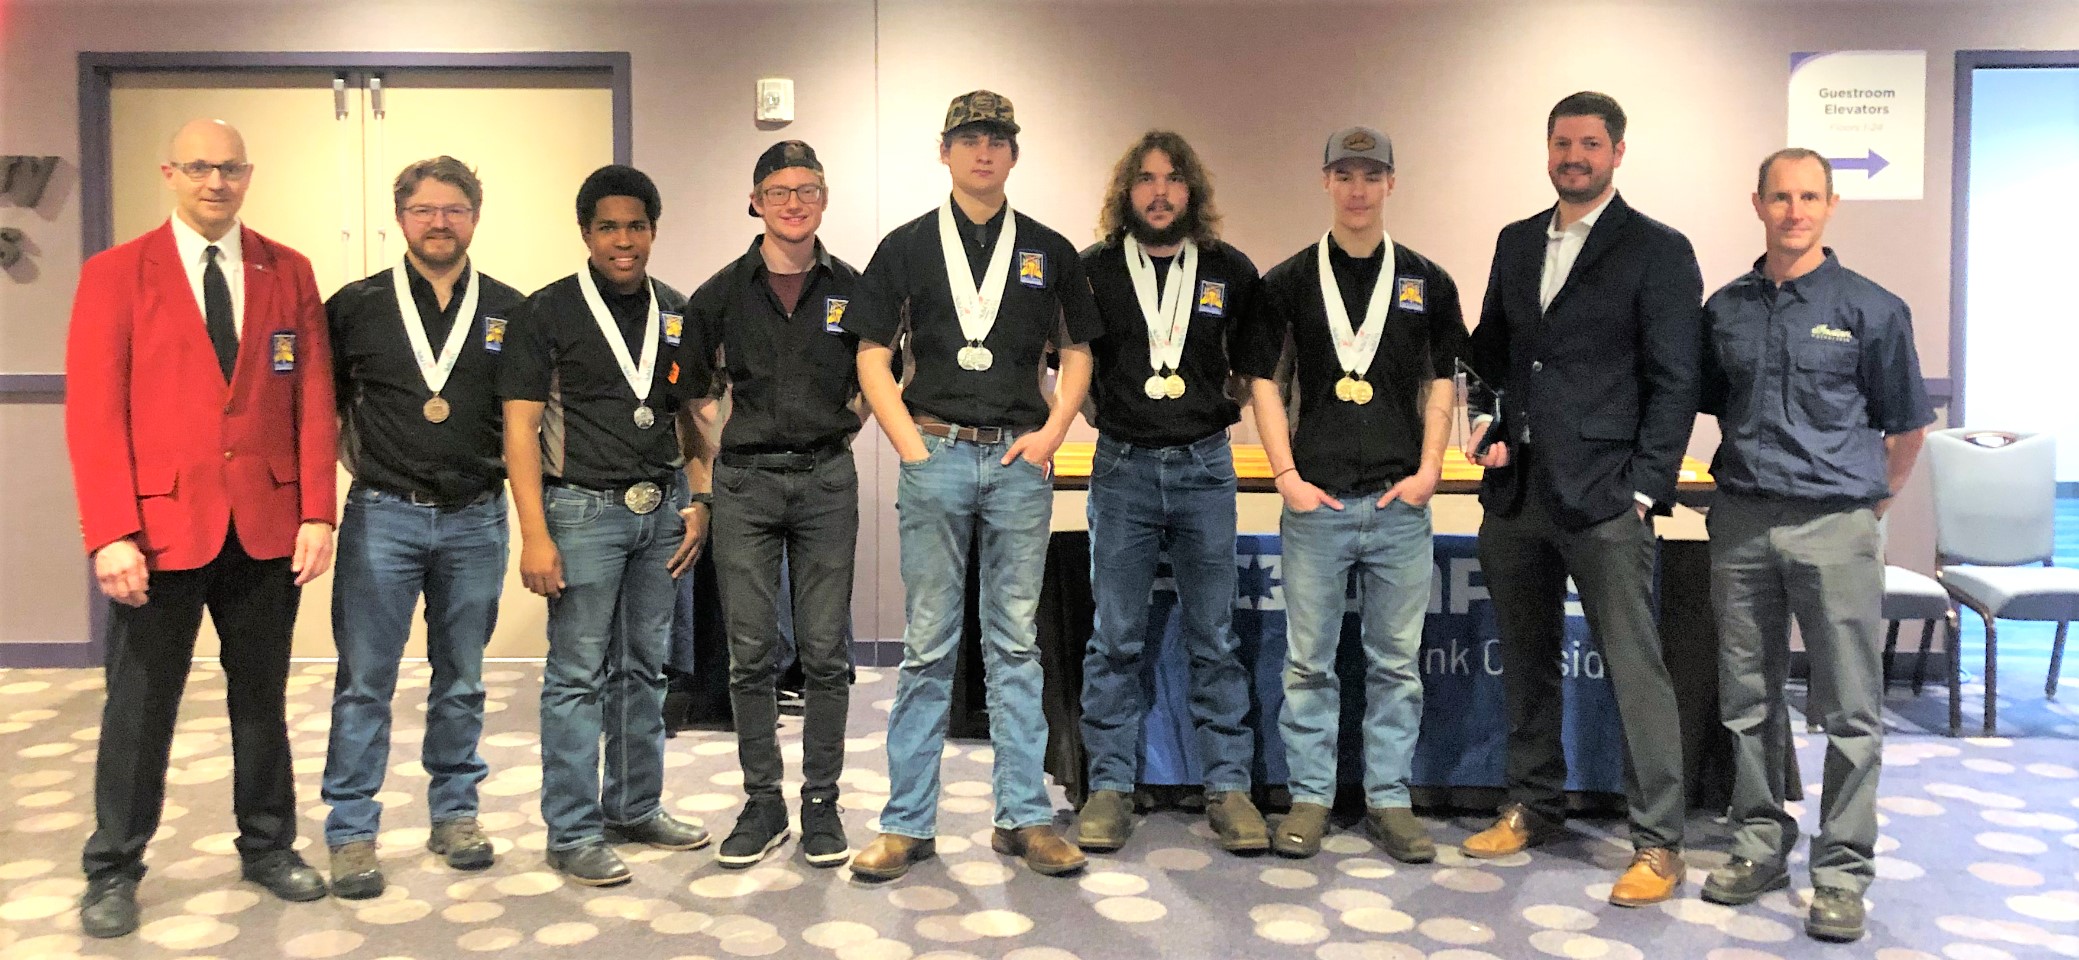 Pictured, left to right, are: M State PowerSports Technology Instructor Kent Reisenauer, students Owen Hemze, Matthew St. Claire, Nick Johnson, Ethan Swiers, Jason Haugen and Riley Schoenberger, and Polaris Technical Trainer Anthony Verhoeven and Polaris Trainer Jim Enning.